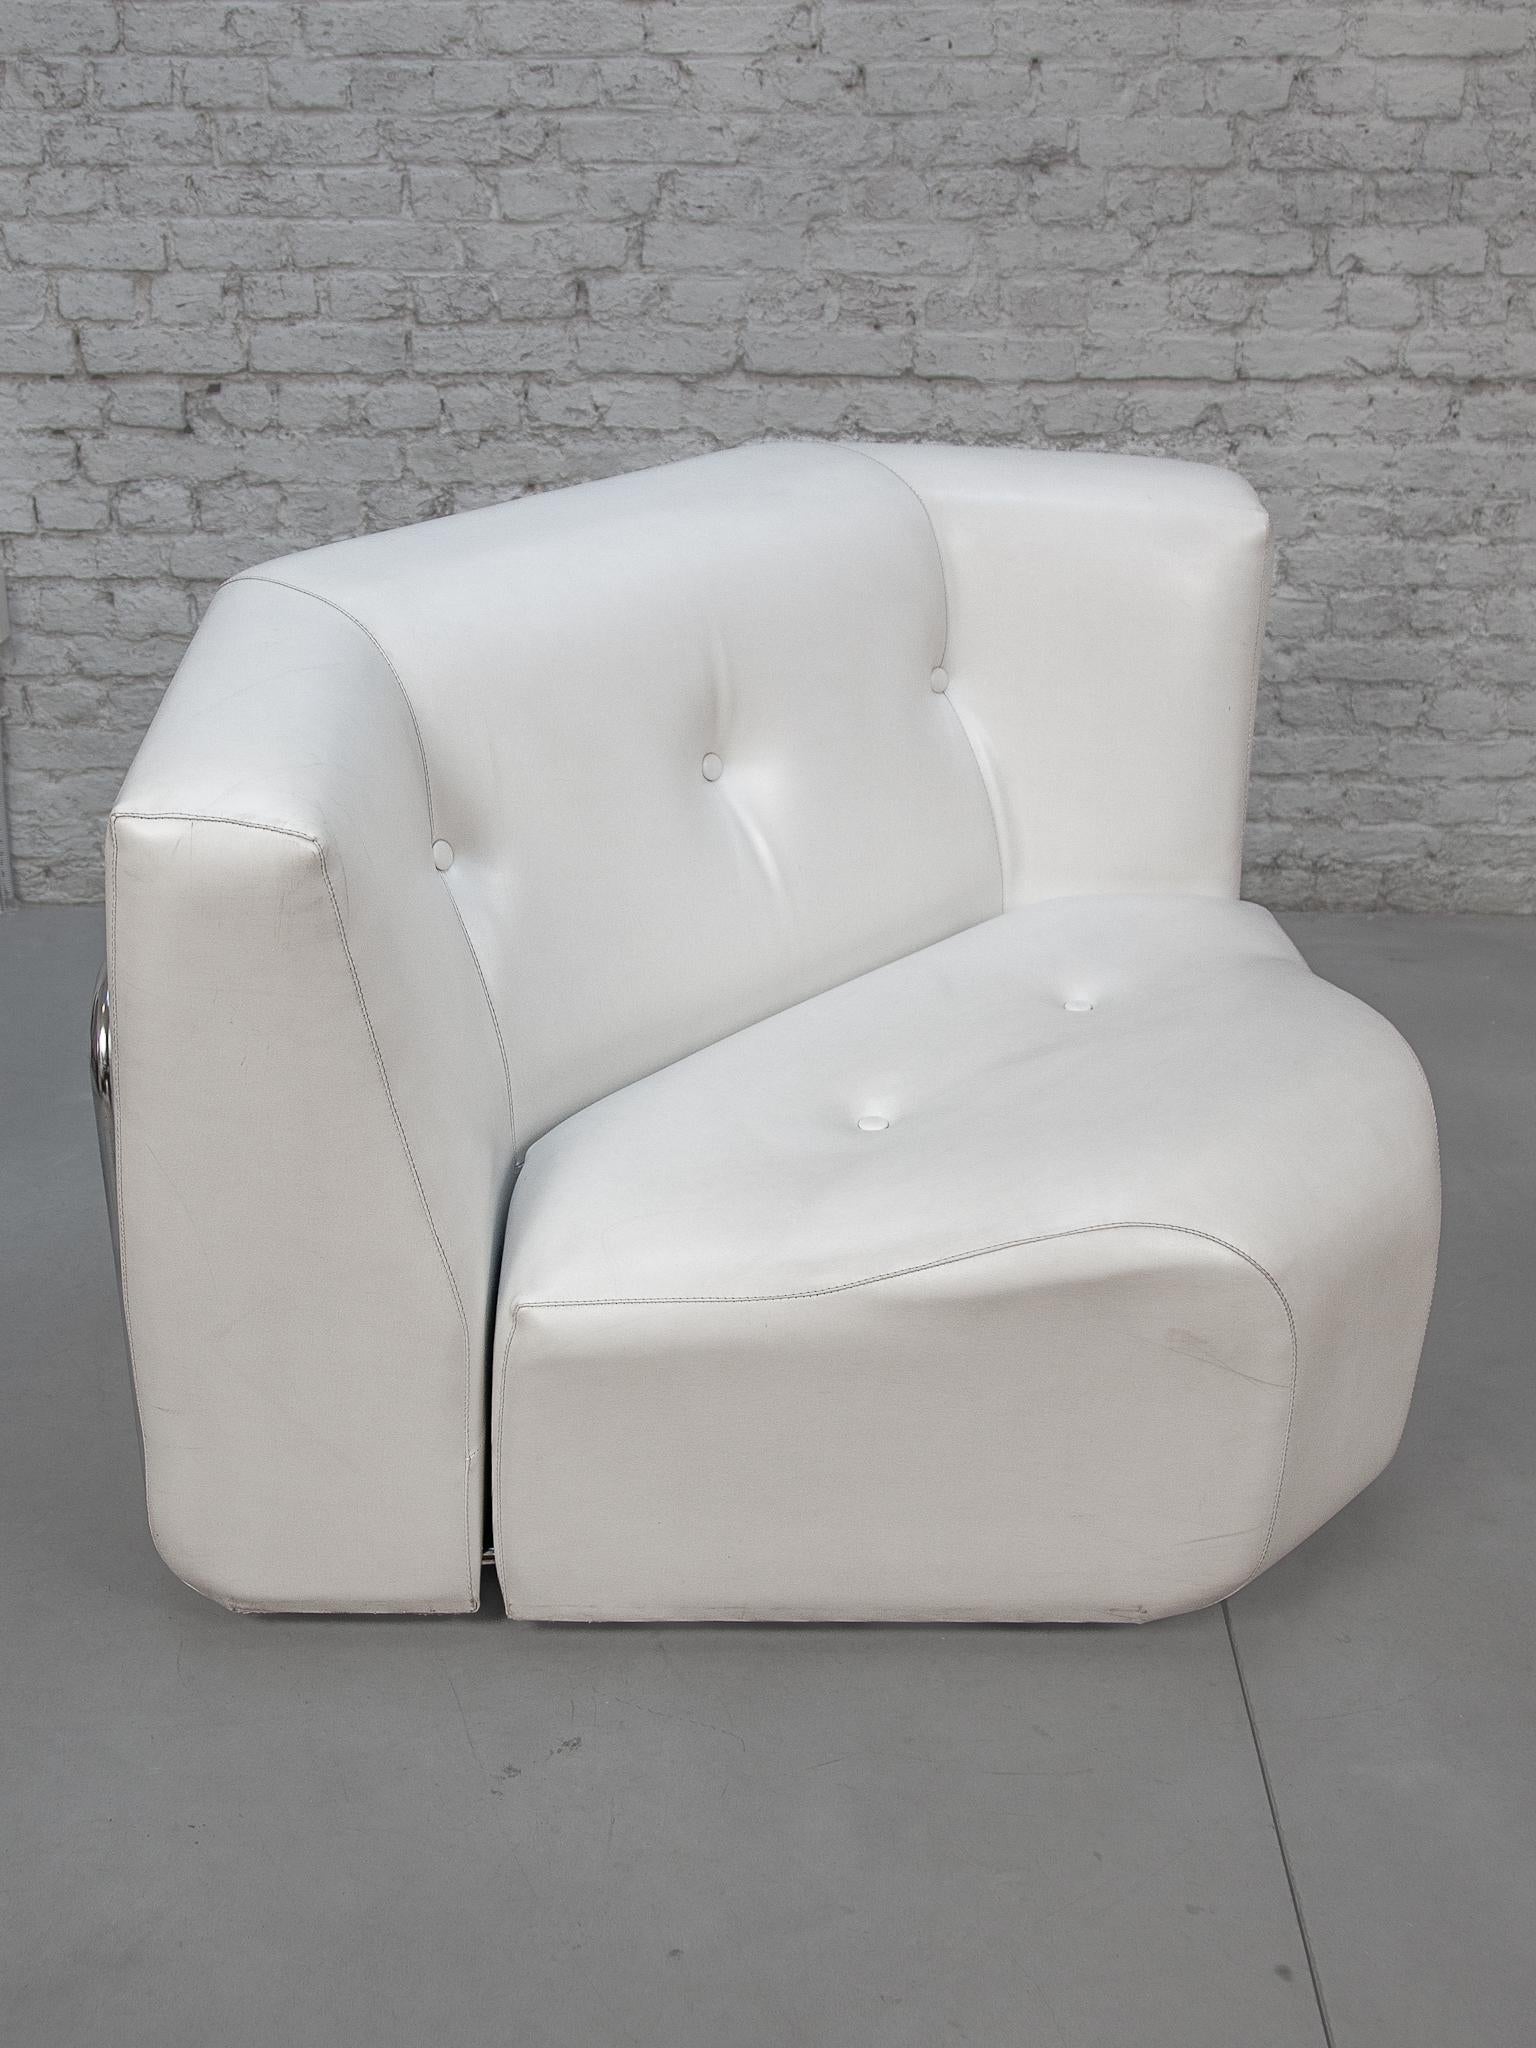 White and Chrome Livingroom set of Adriano Piazzesi Lounge Chairs and Footstools For Sale 7